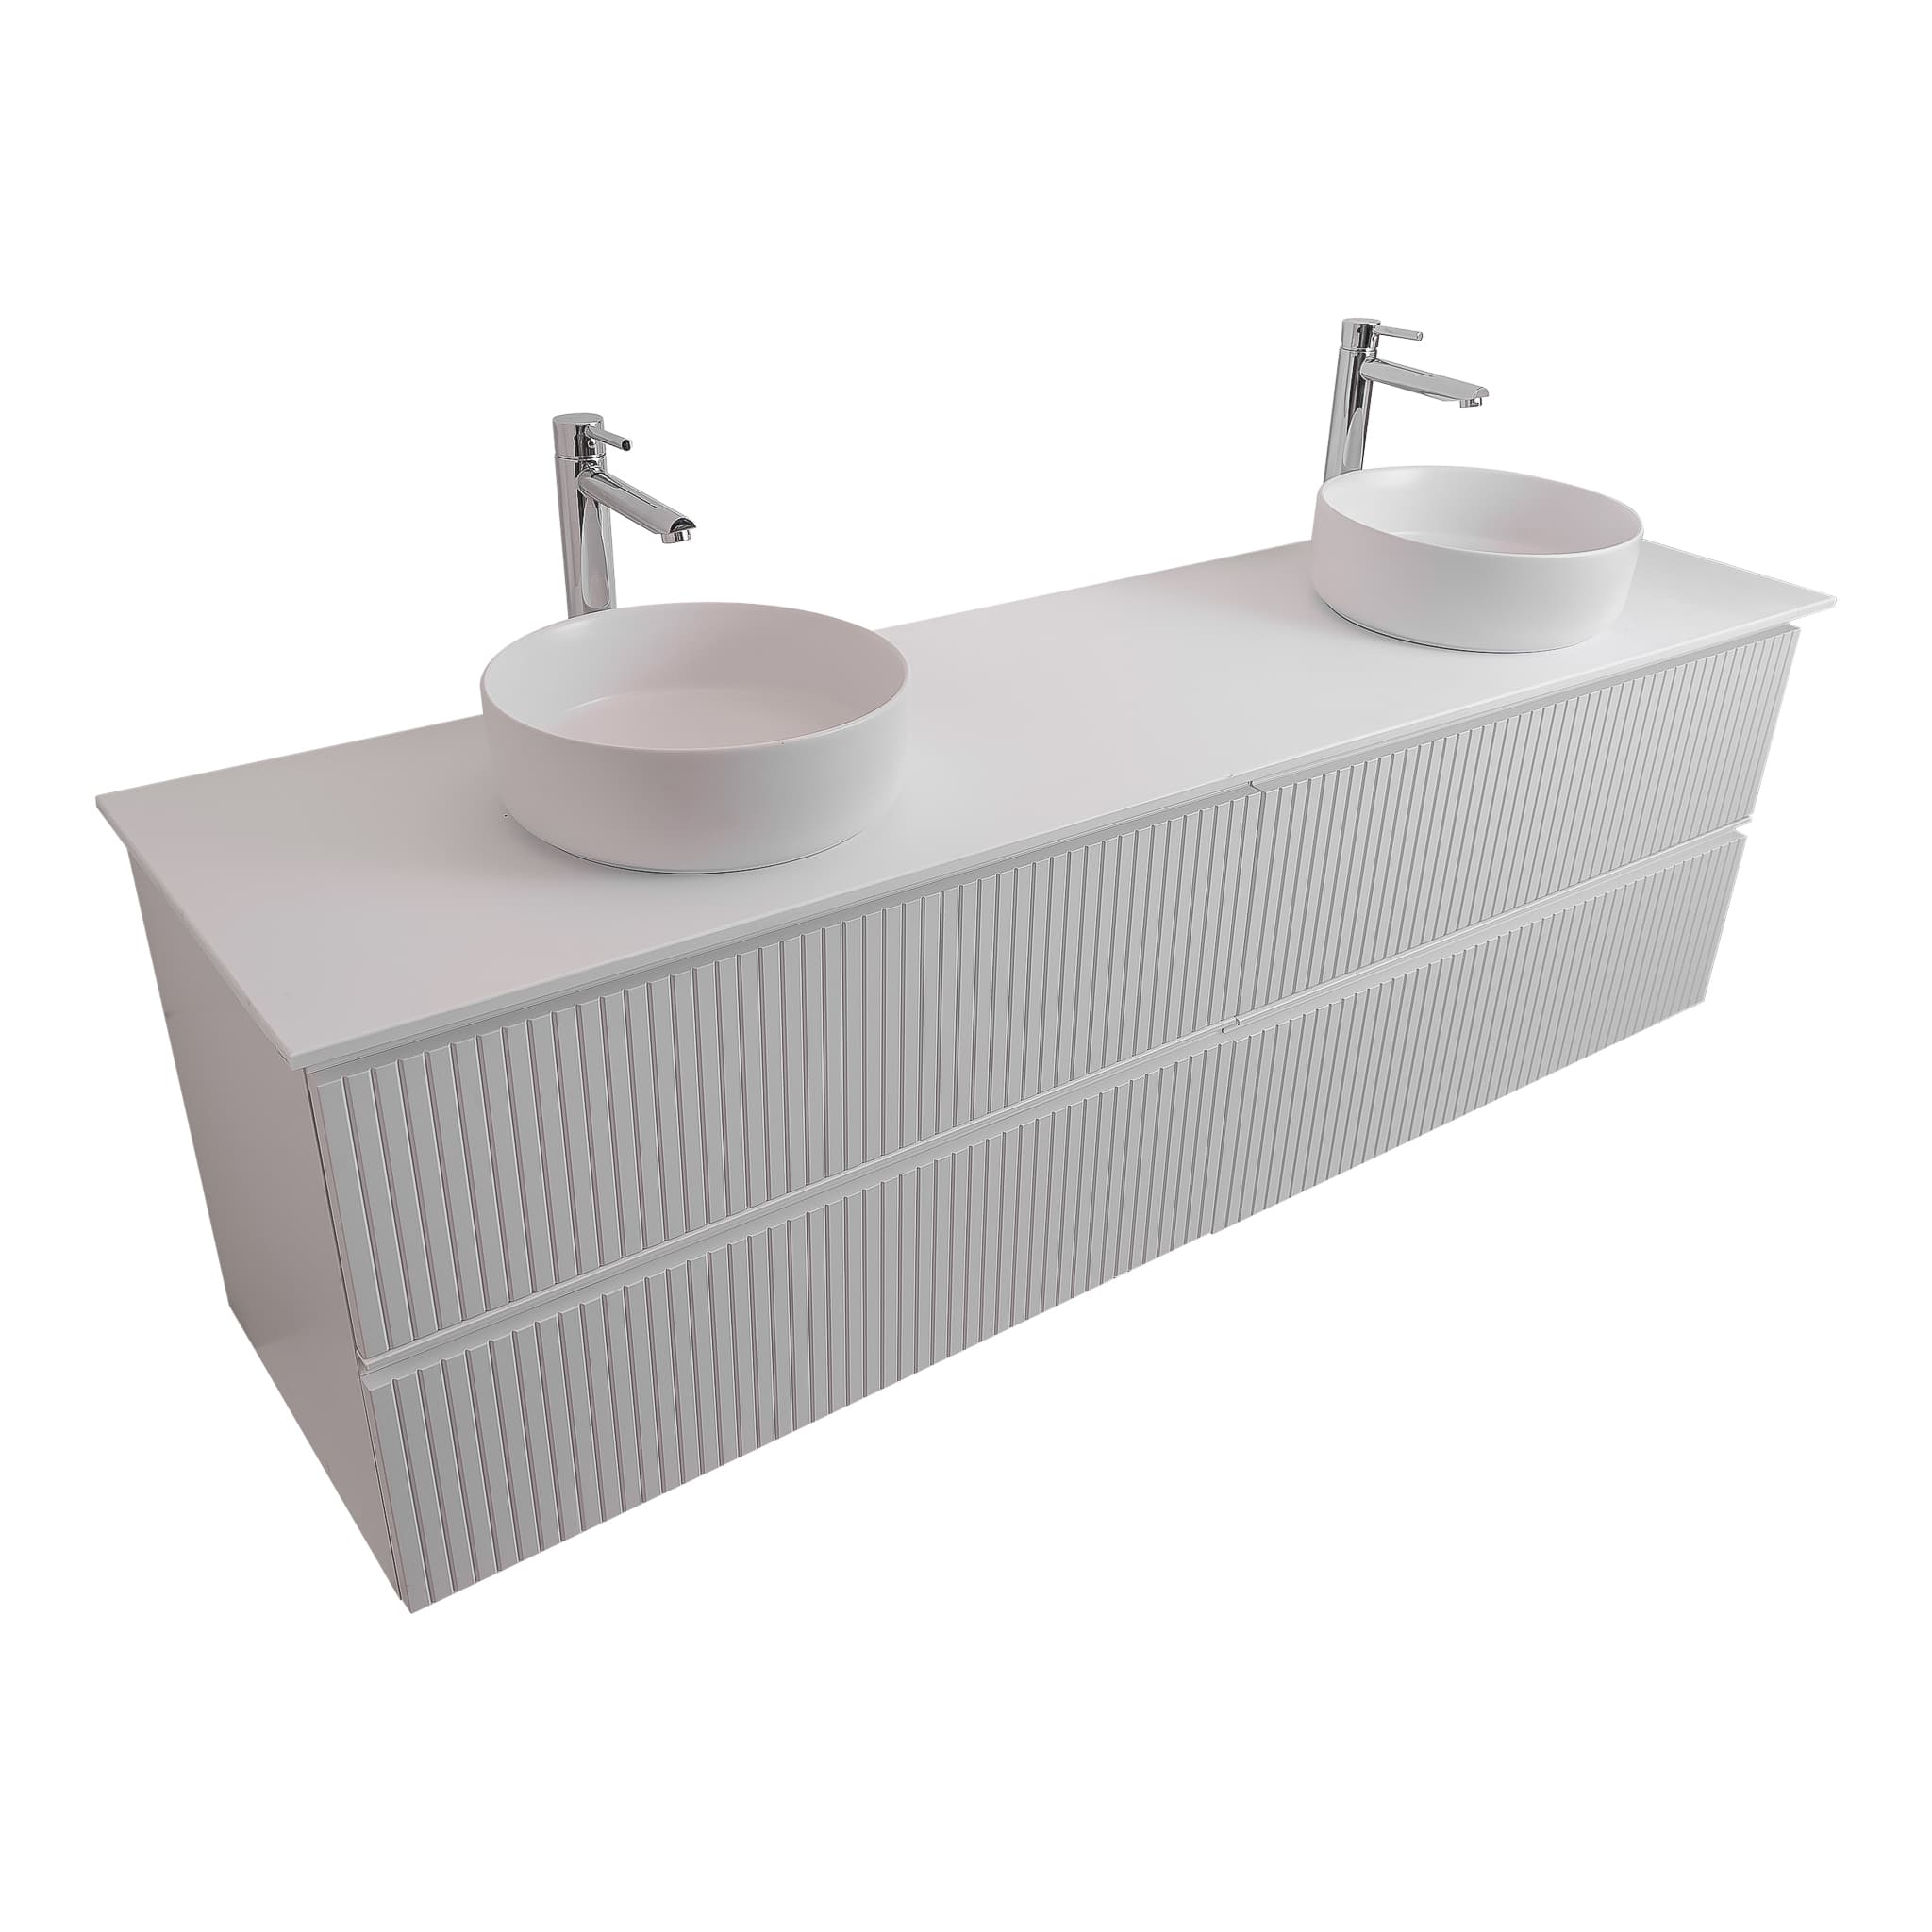 Ares 72 Matte White Cabinet, Ares White Top And Two Ares White Ceramic Basin, Wall Mounted Modern Vanity Set